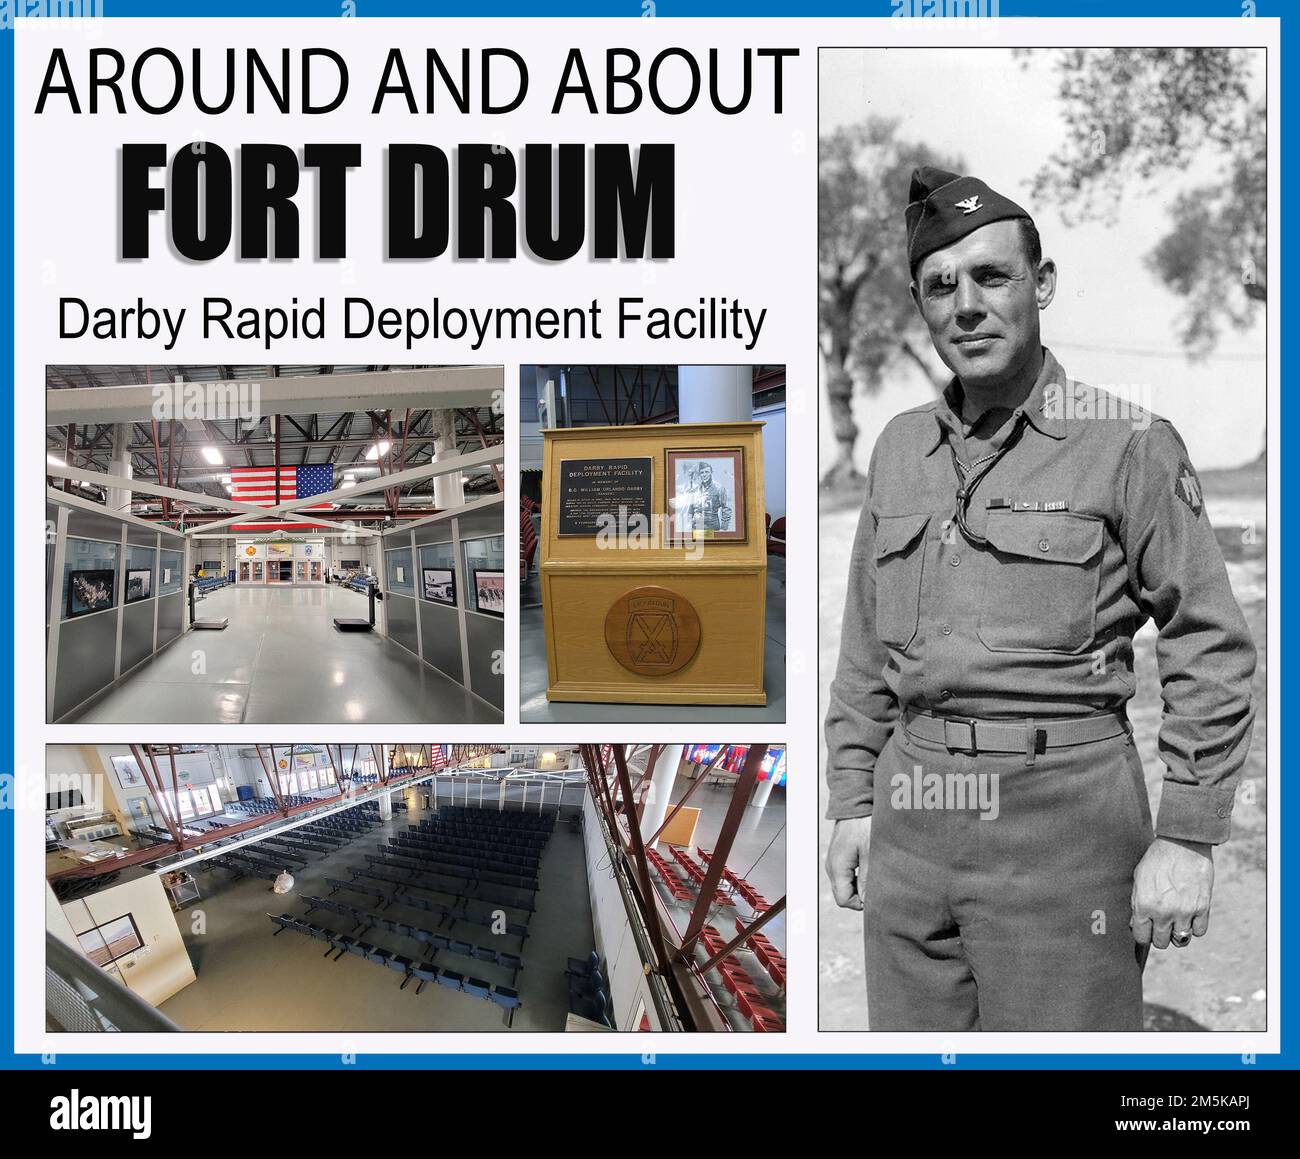 The Fort Drum facility from where 10th Mountain Division (LI) Soldiers deploy is named after the officer who led the first Army Rangers during World War II and was the 10th Mountain Division’s assistant commander during the campaign in Italy. Stock Photo